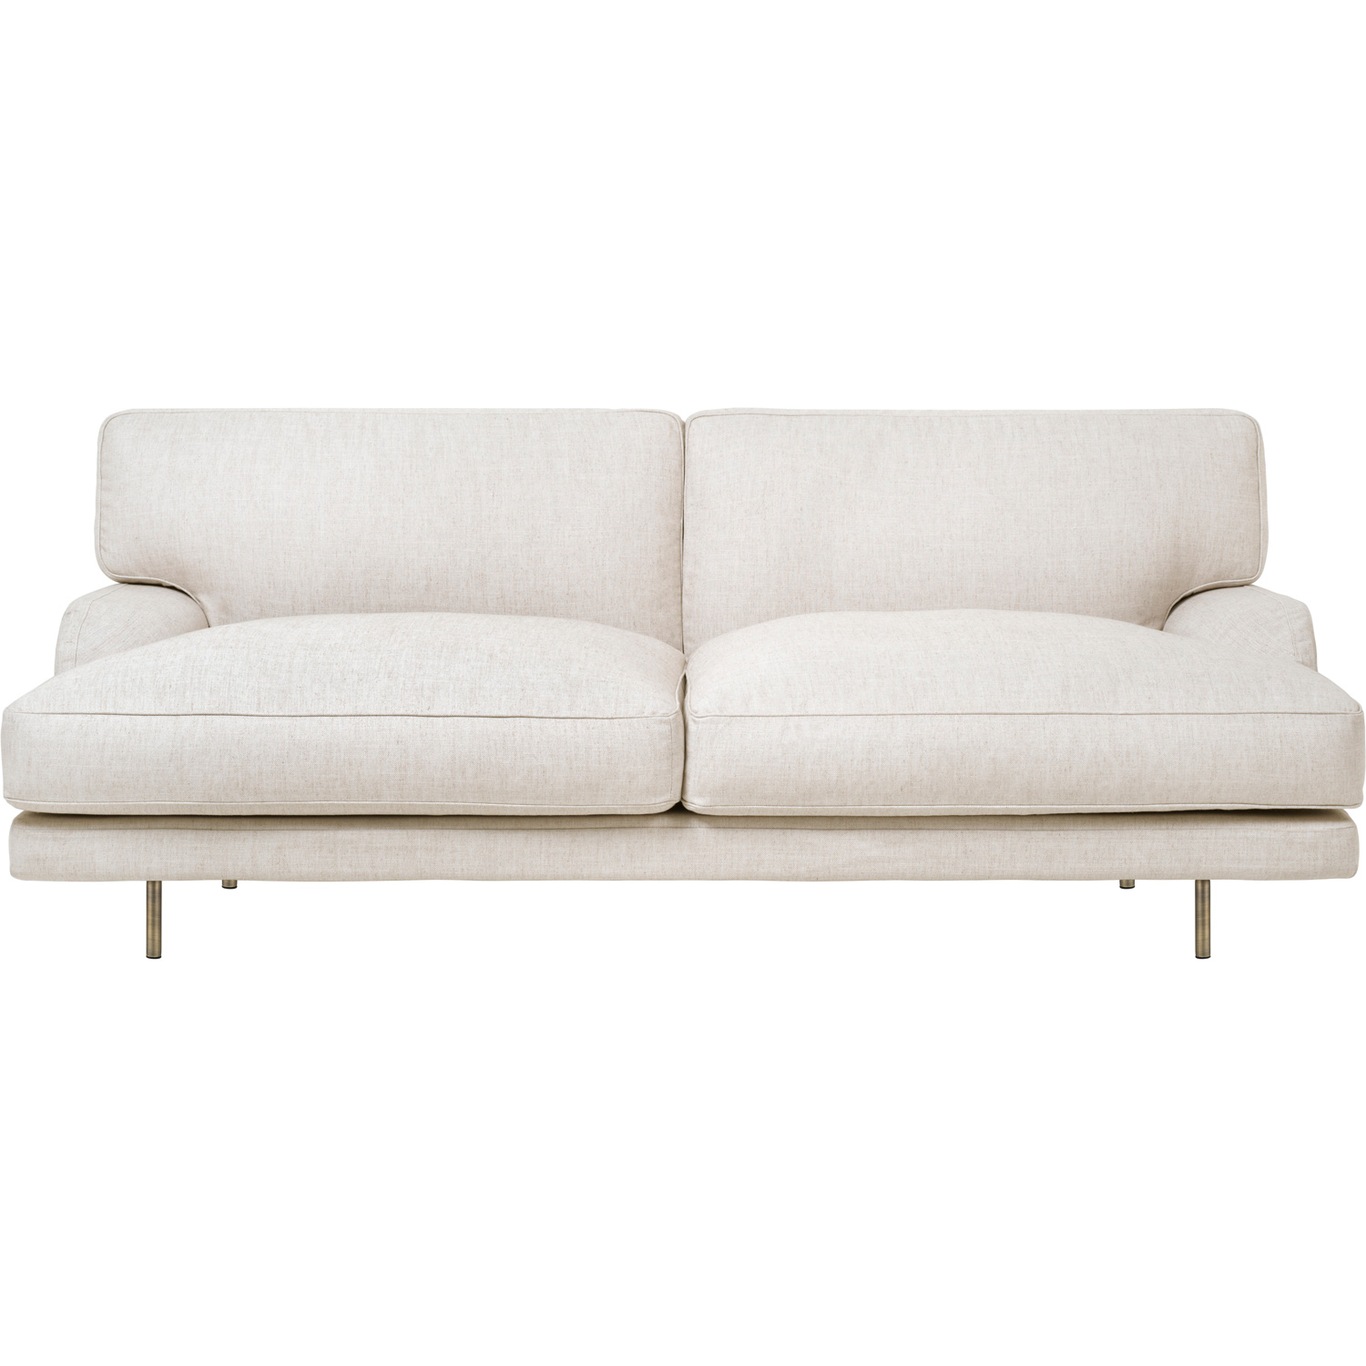 Flaneur Sofa FC 2-Pers, Ben Messing / Hot Madison 419 Off White